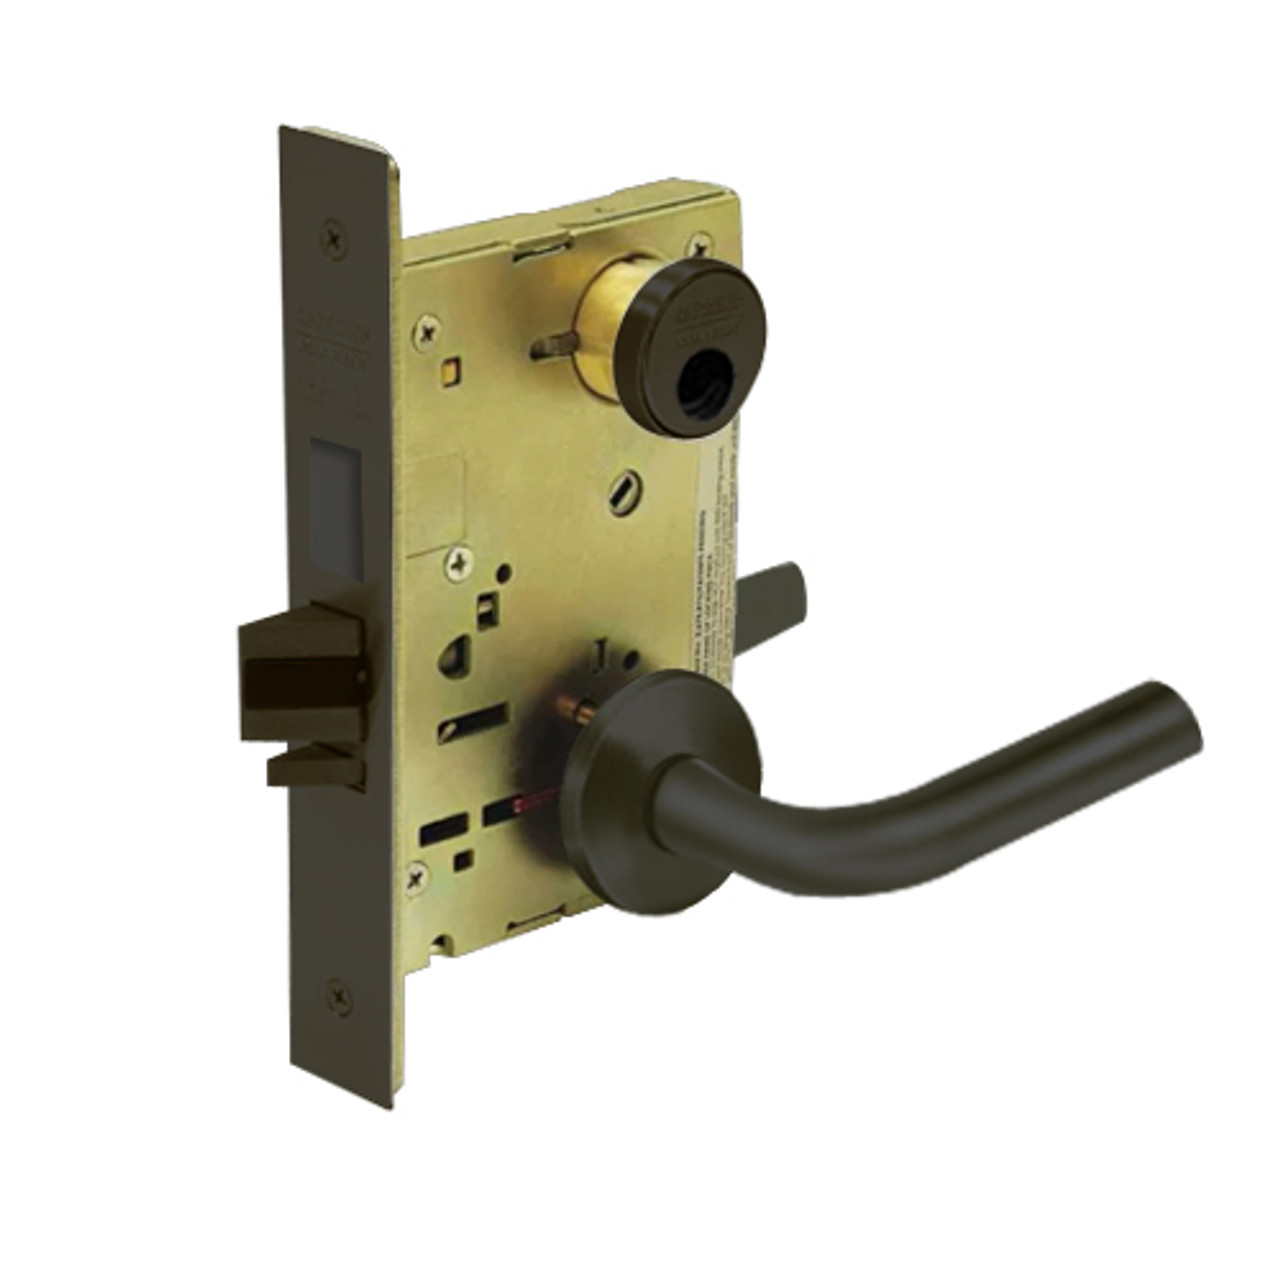 LC-8225-LNW-10B Sargent 8200 Series Dormitory or Exit Mortise Lock with LNW Lever Trim and Deadbolt Less Cylinder in Oxidized Dull Bronze